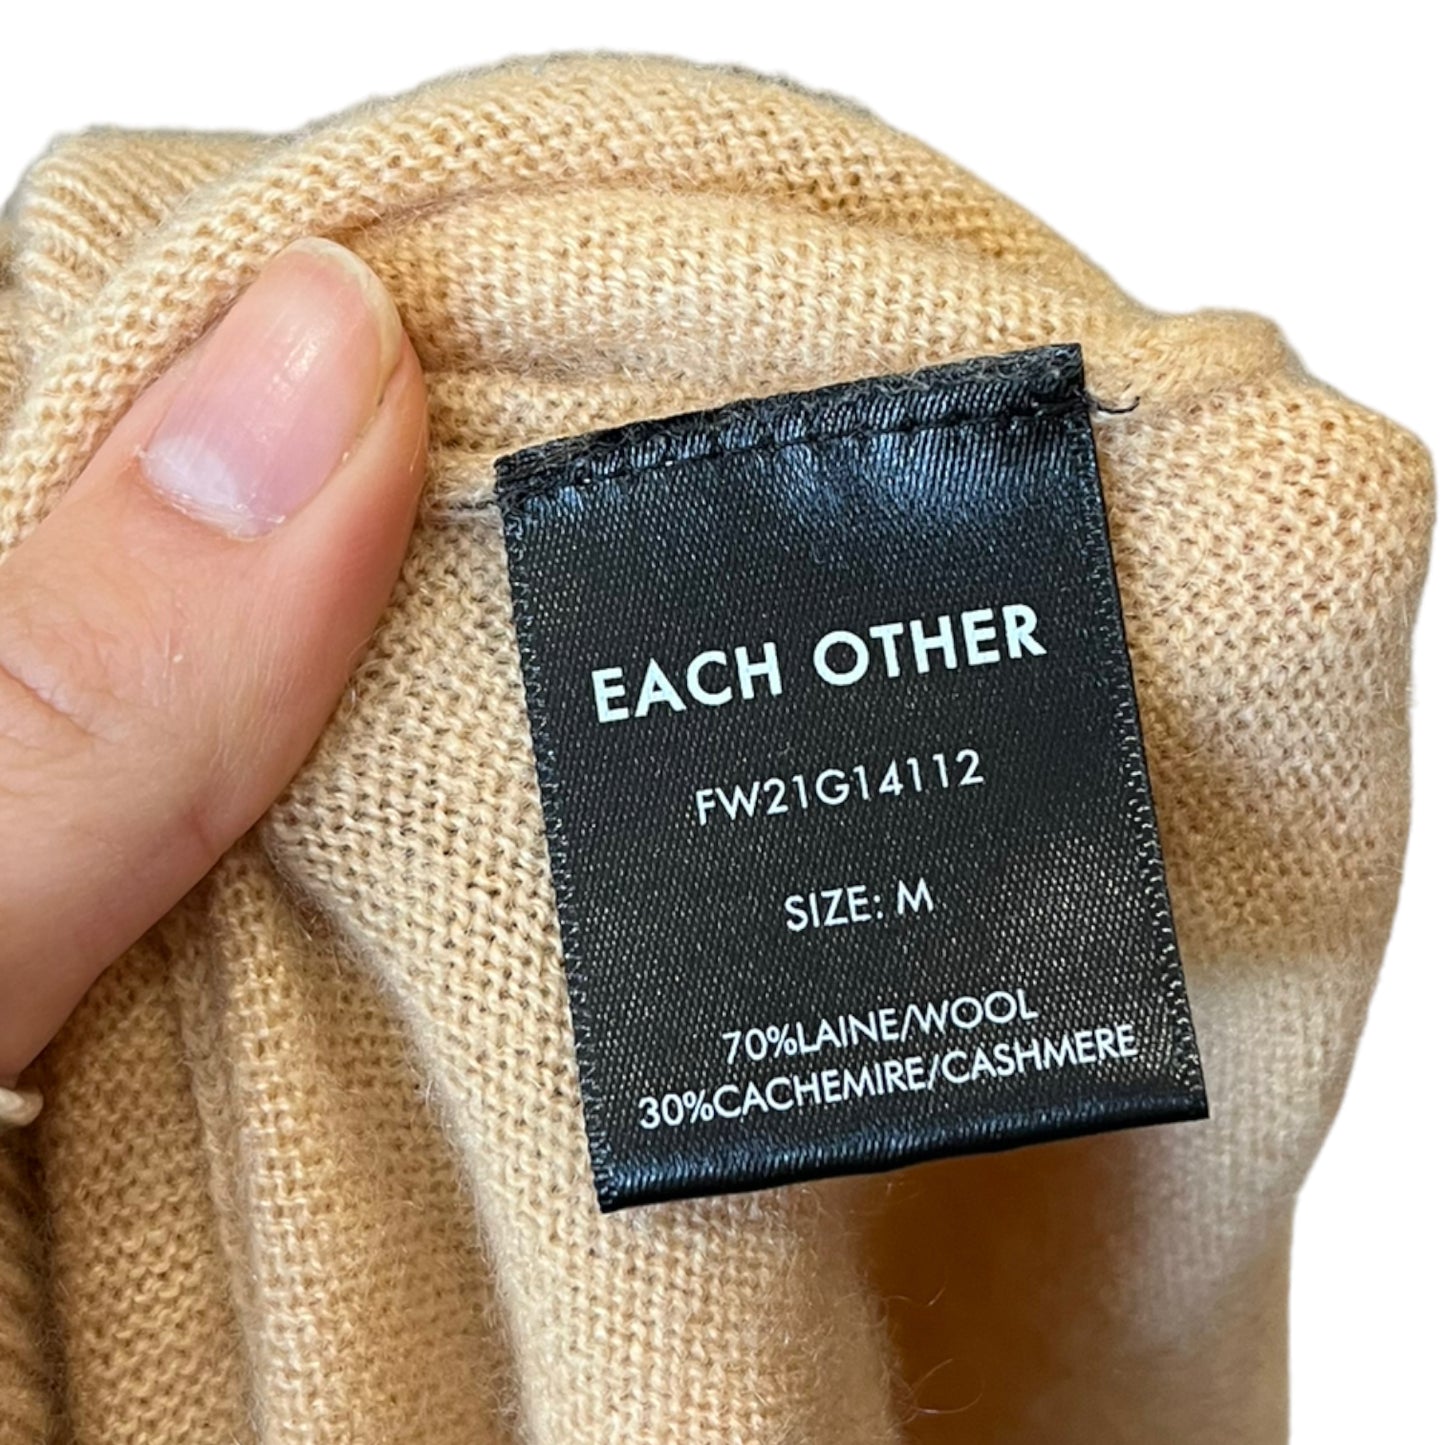 Each Other Tan Cashmere Hoodie